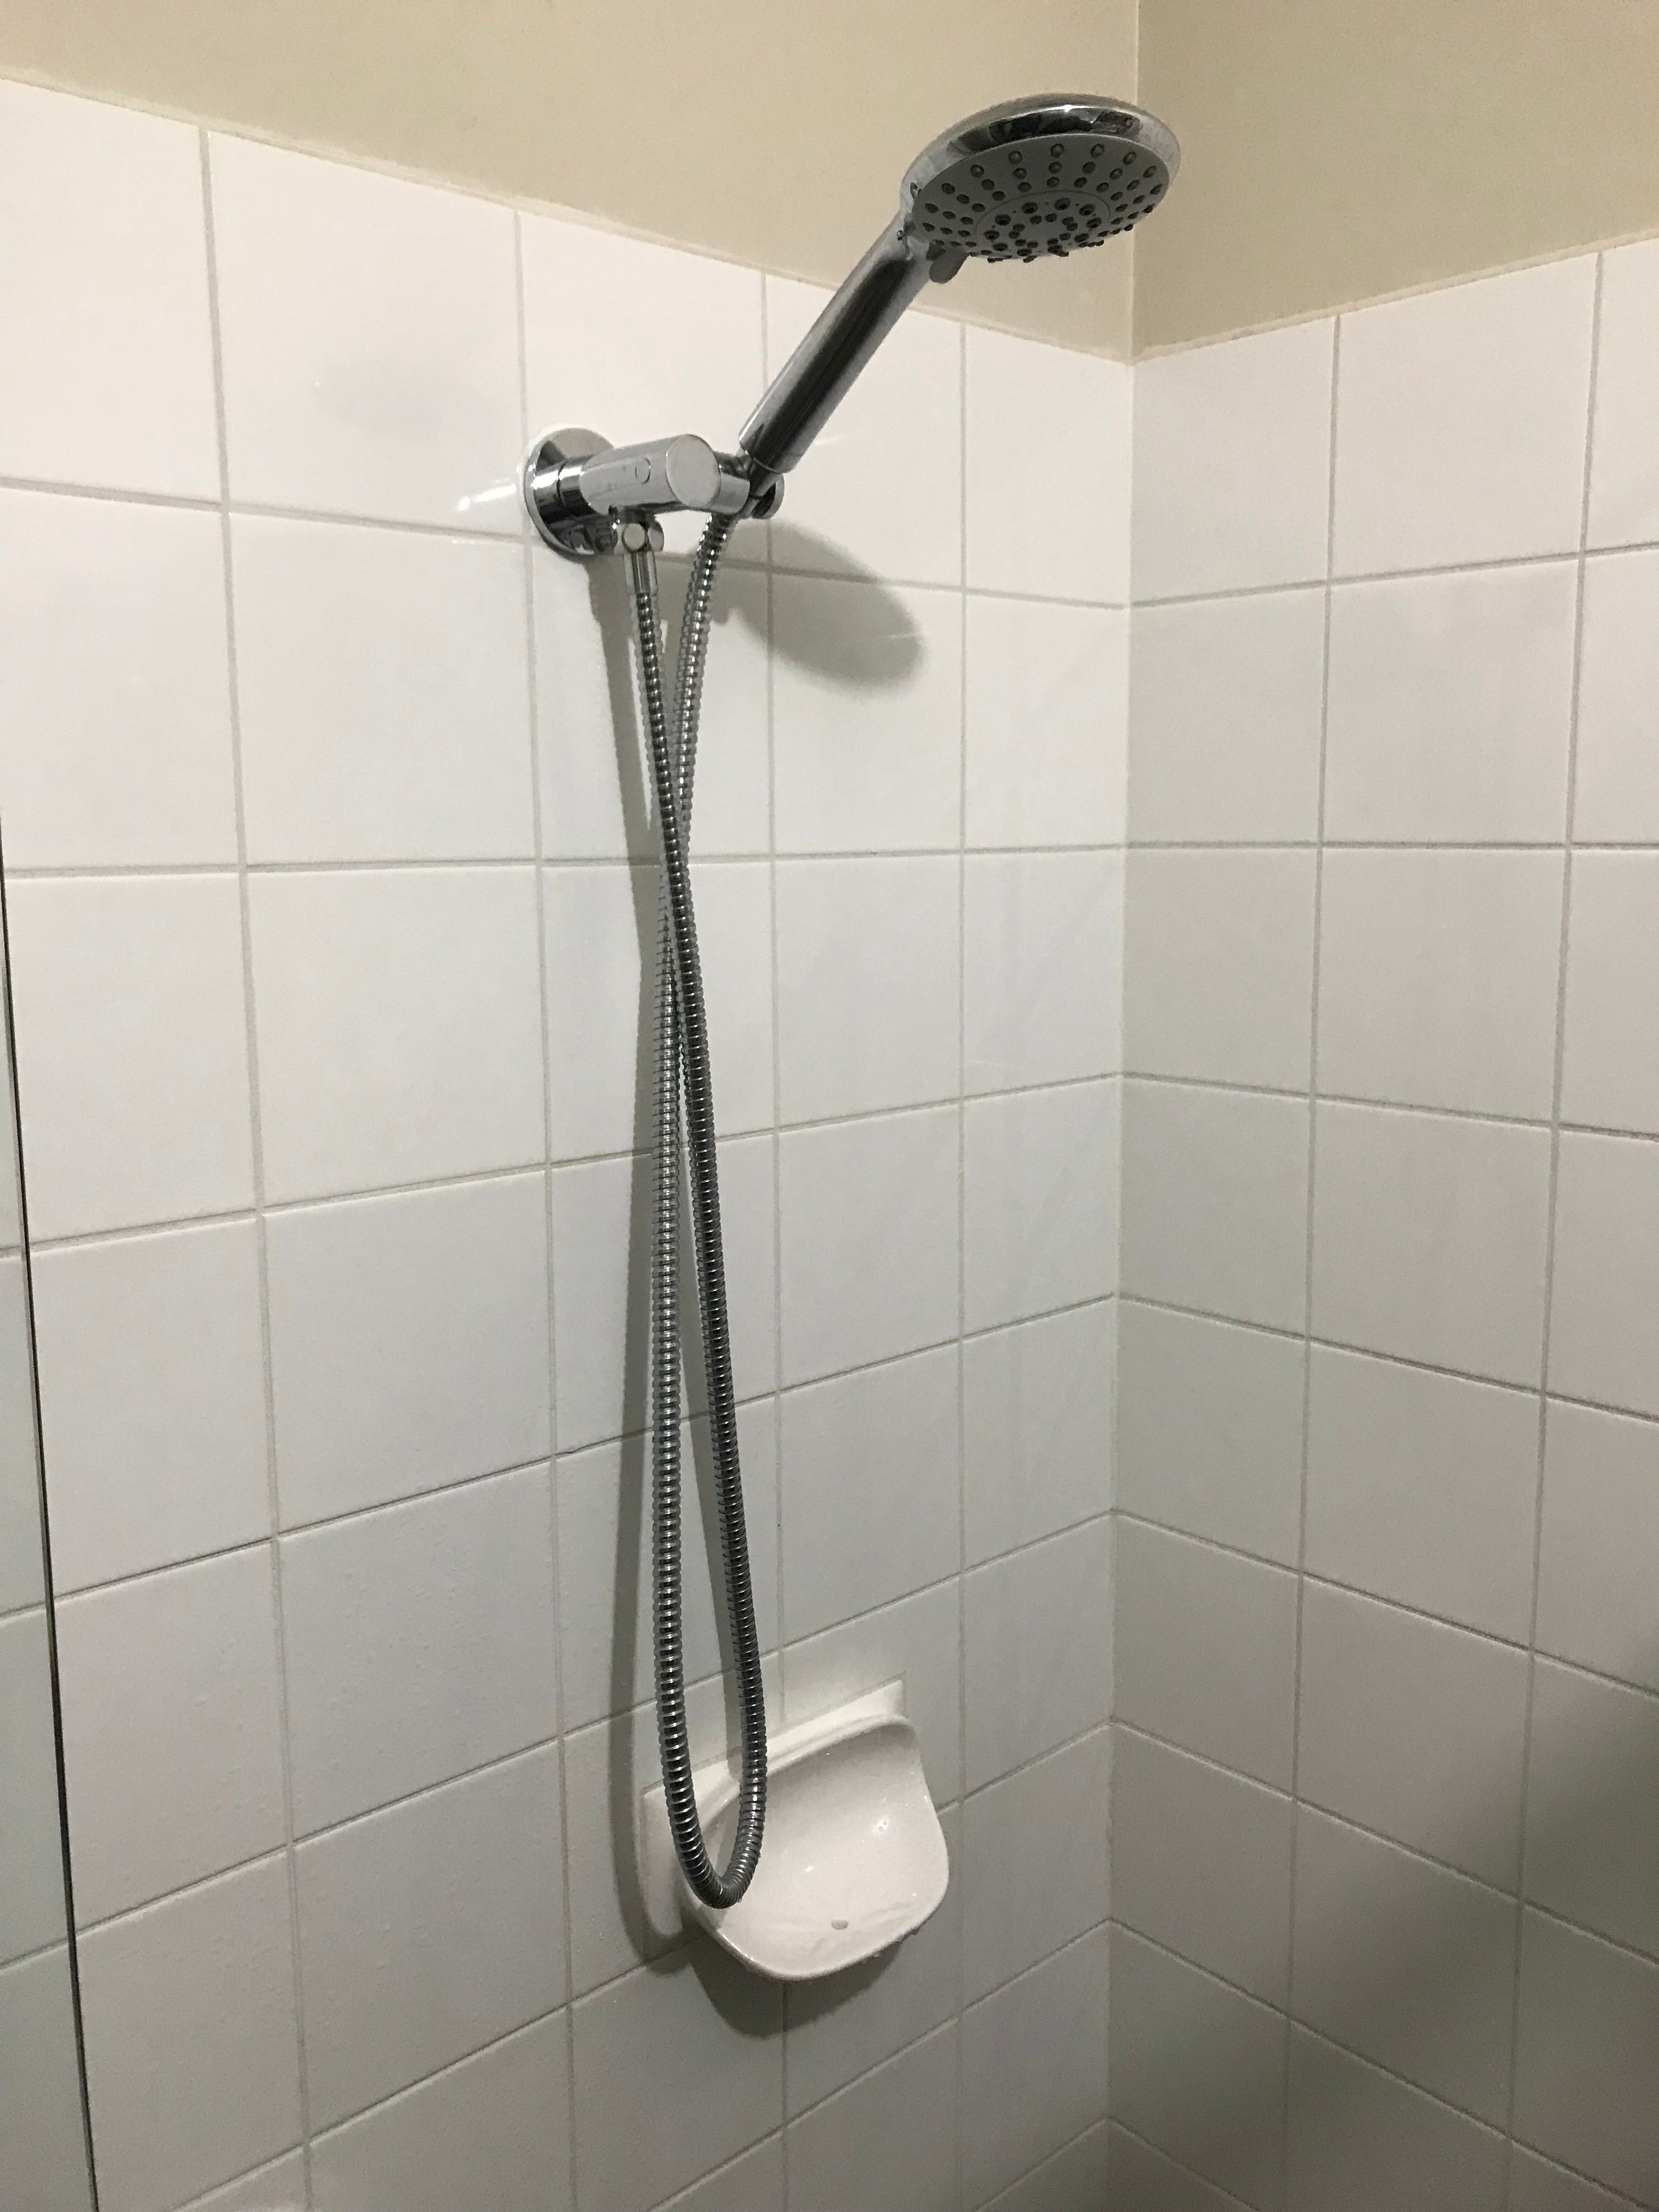 replacing an existing shower head bunnings workshop